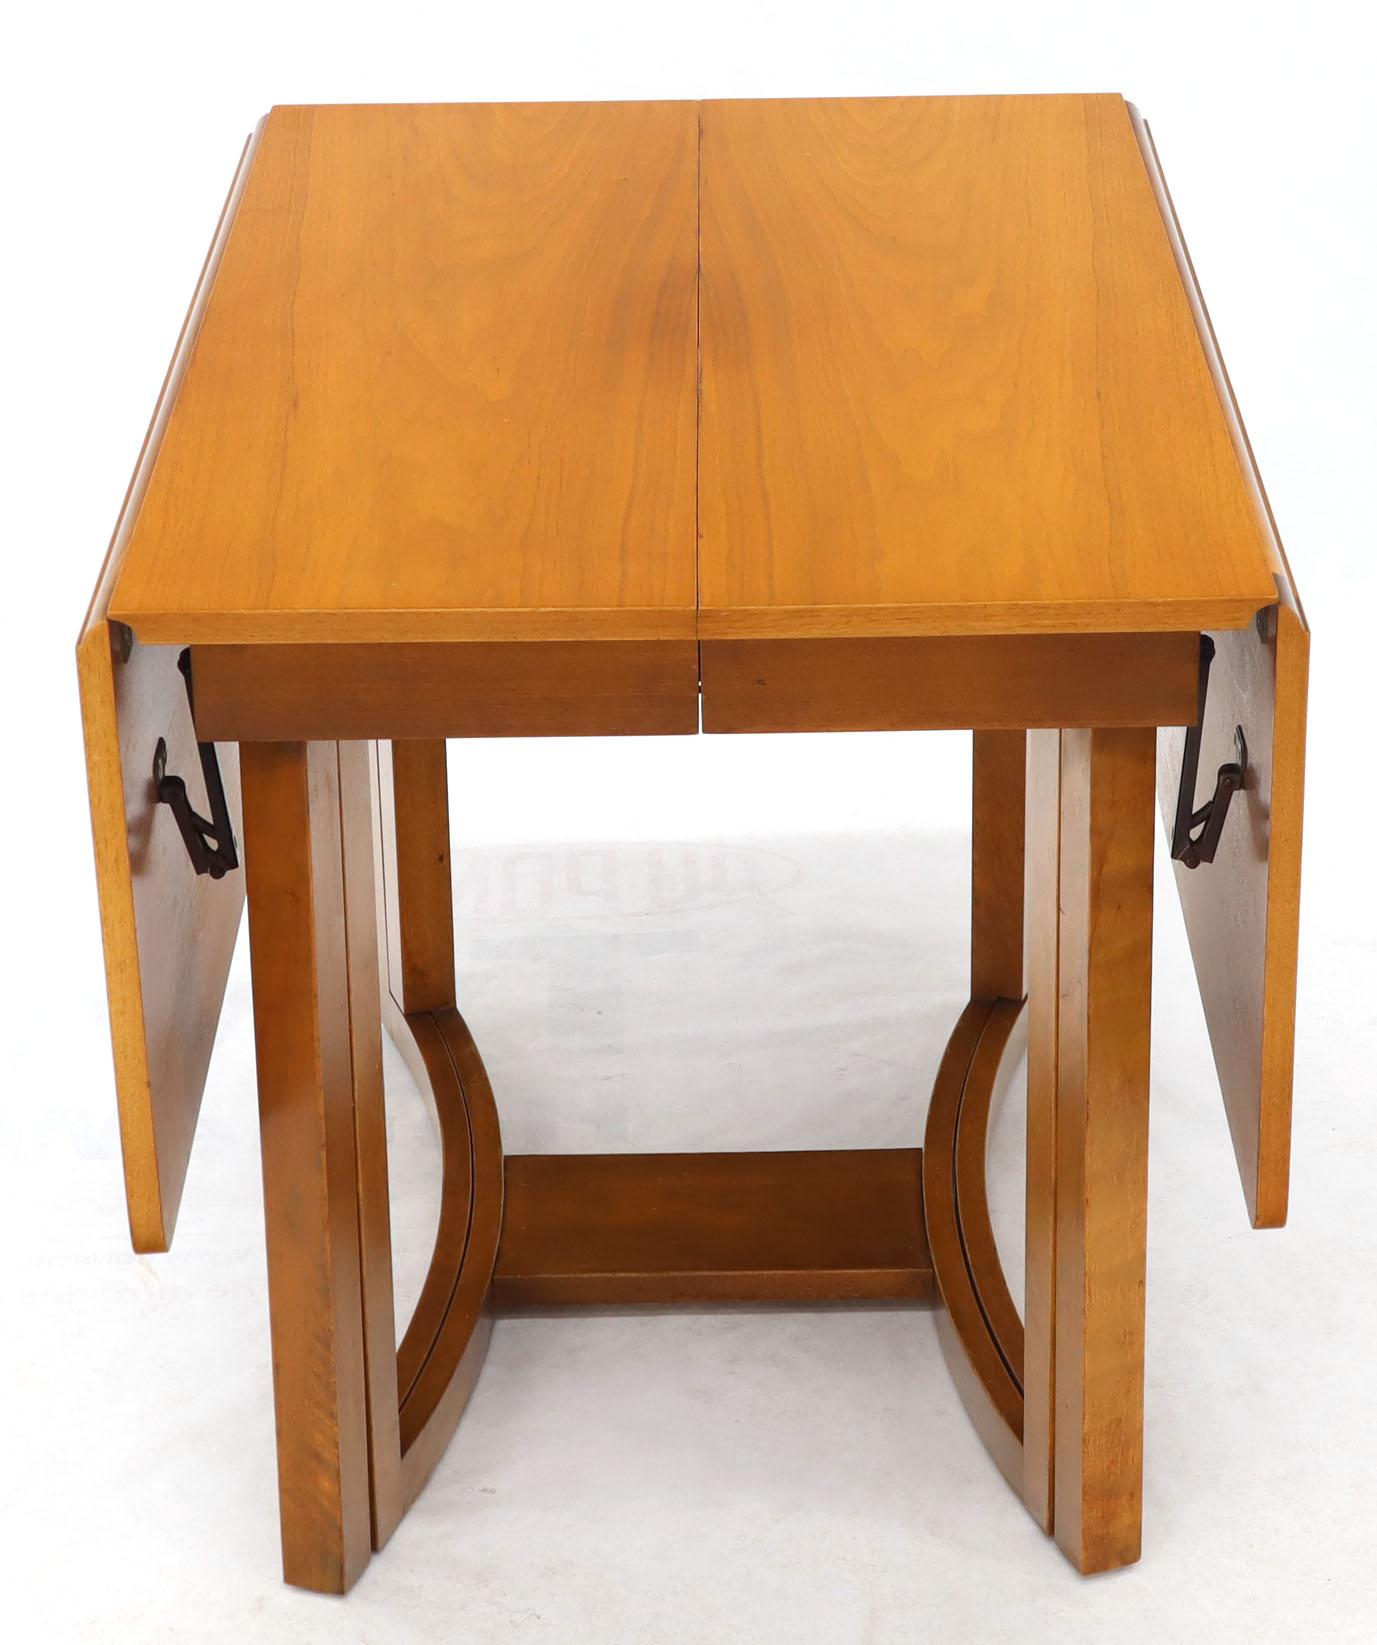 20th Century Midcentury Light Walnut Drop Leaf Expandable Dining Table, Three Leafs Boards For Sale